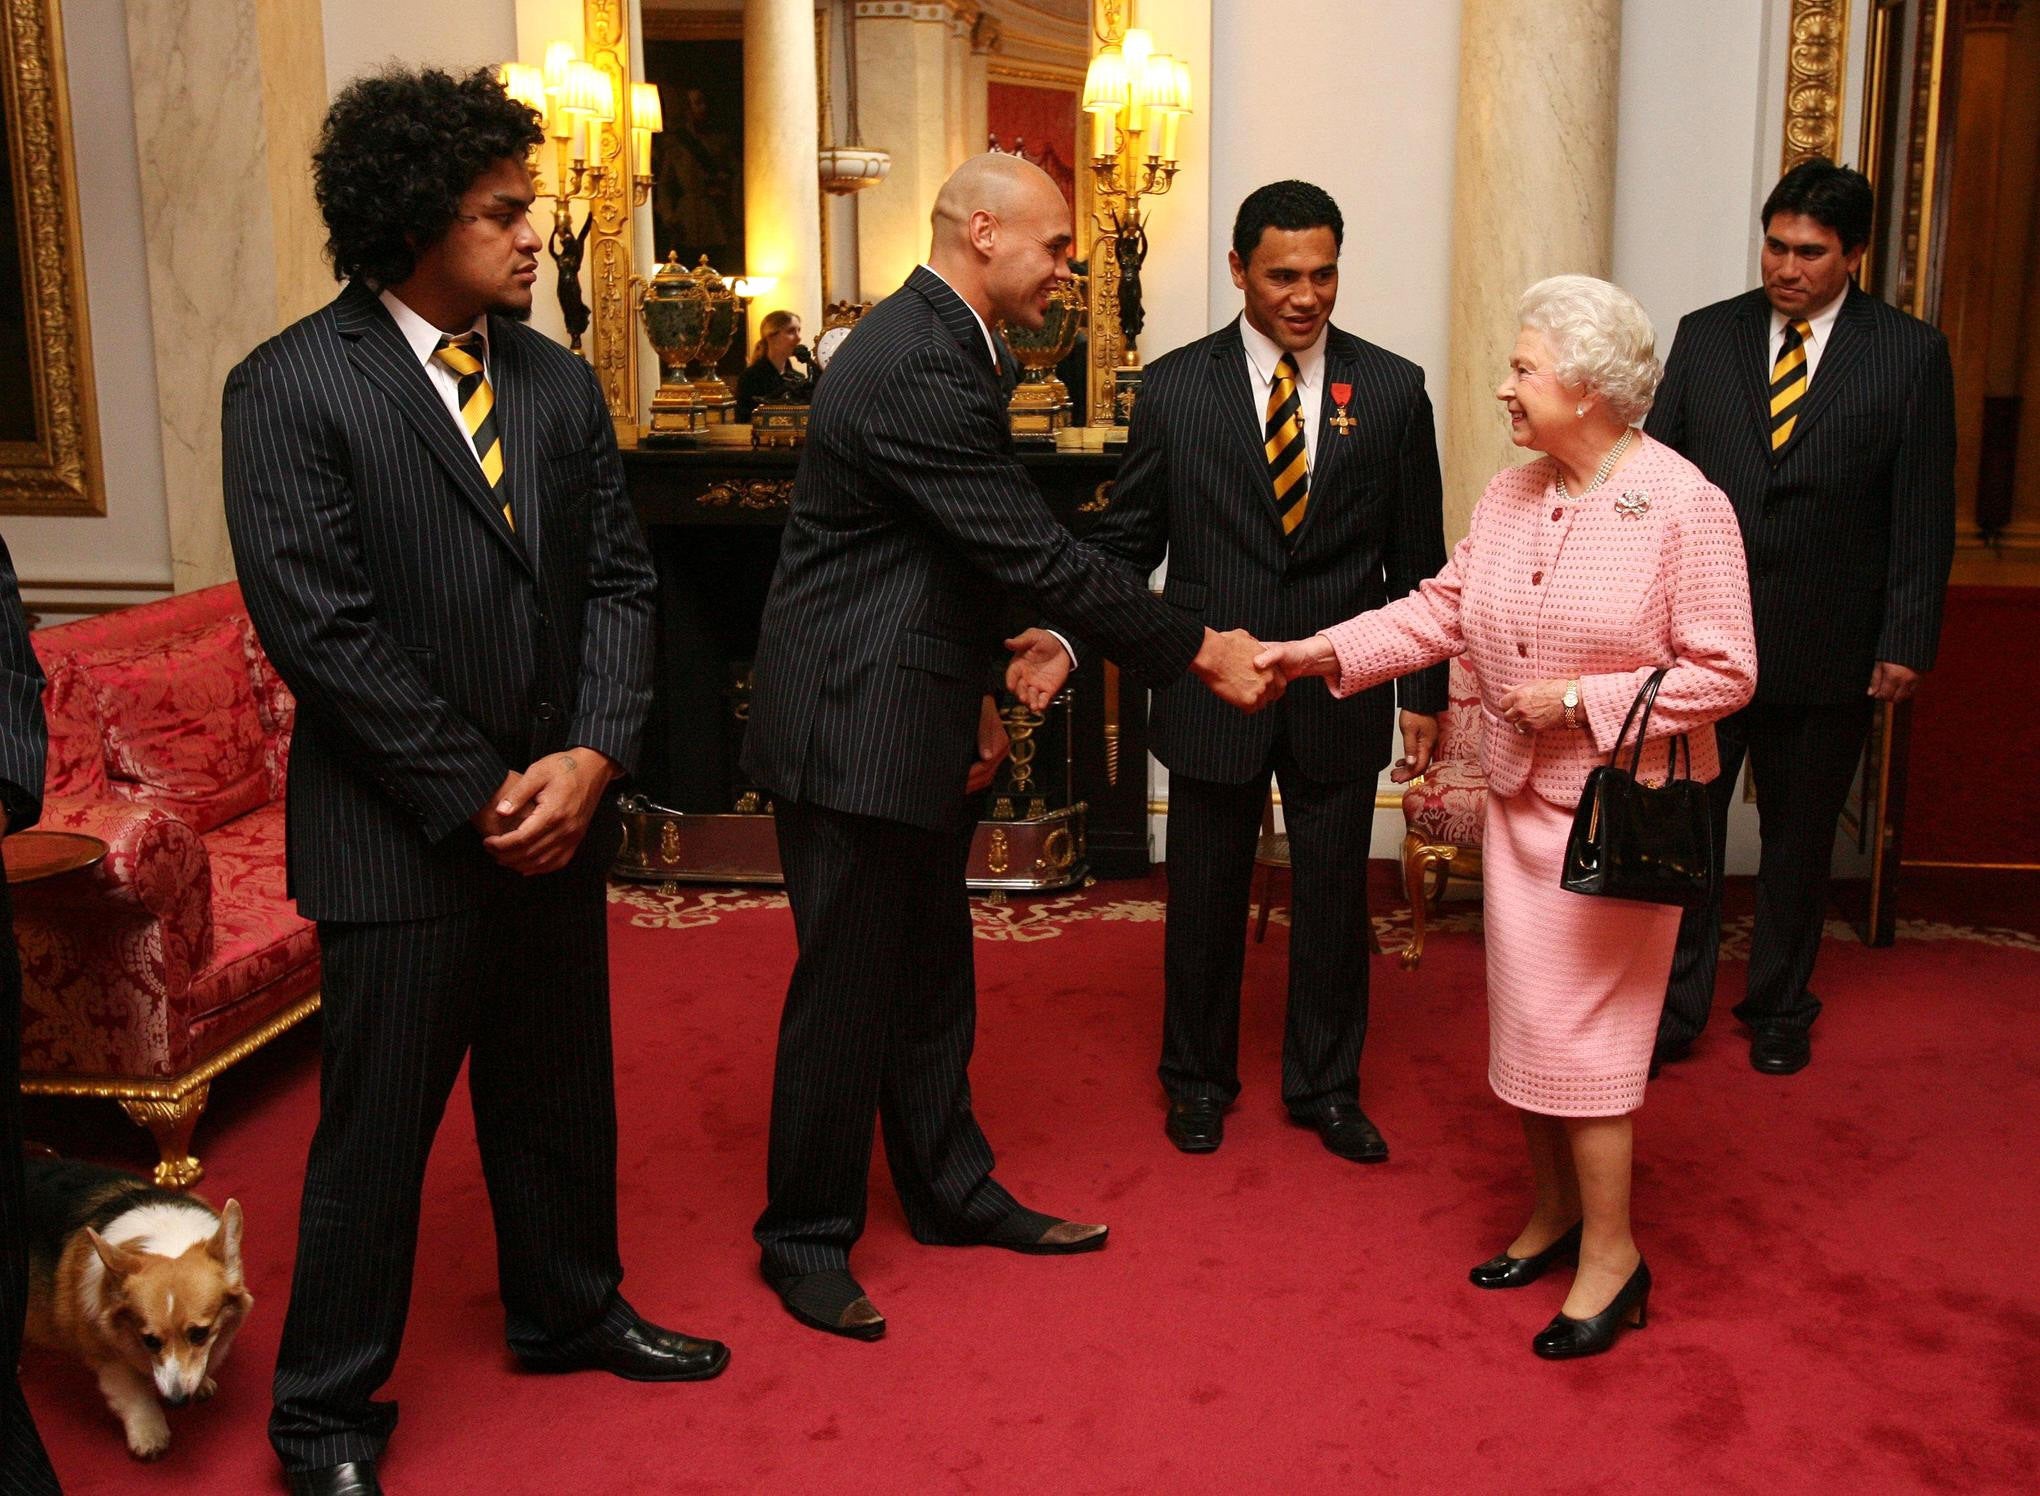 The Queen was introduced to the members of the New Zealand rugby league team inside the Bow Room at Buckingham Palace in 2005 (Johnny Green/PA)